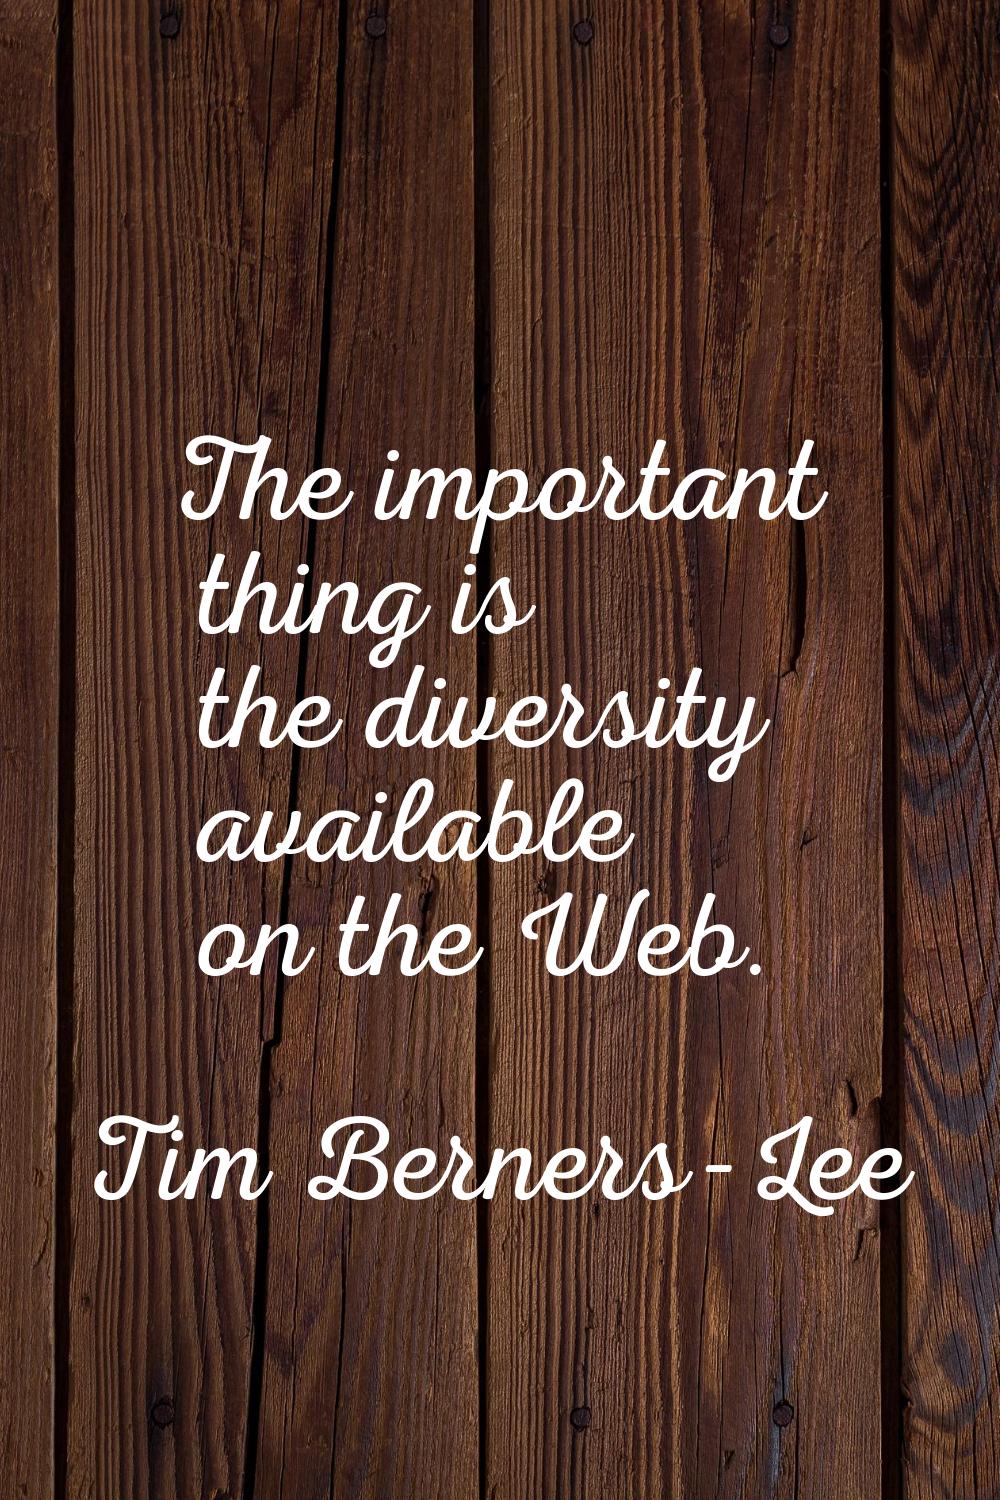 The important thing is the diversity available on the Web.